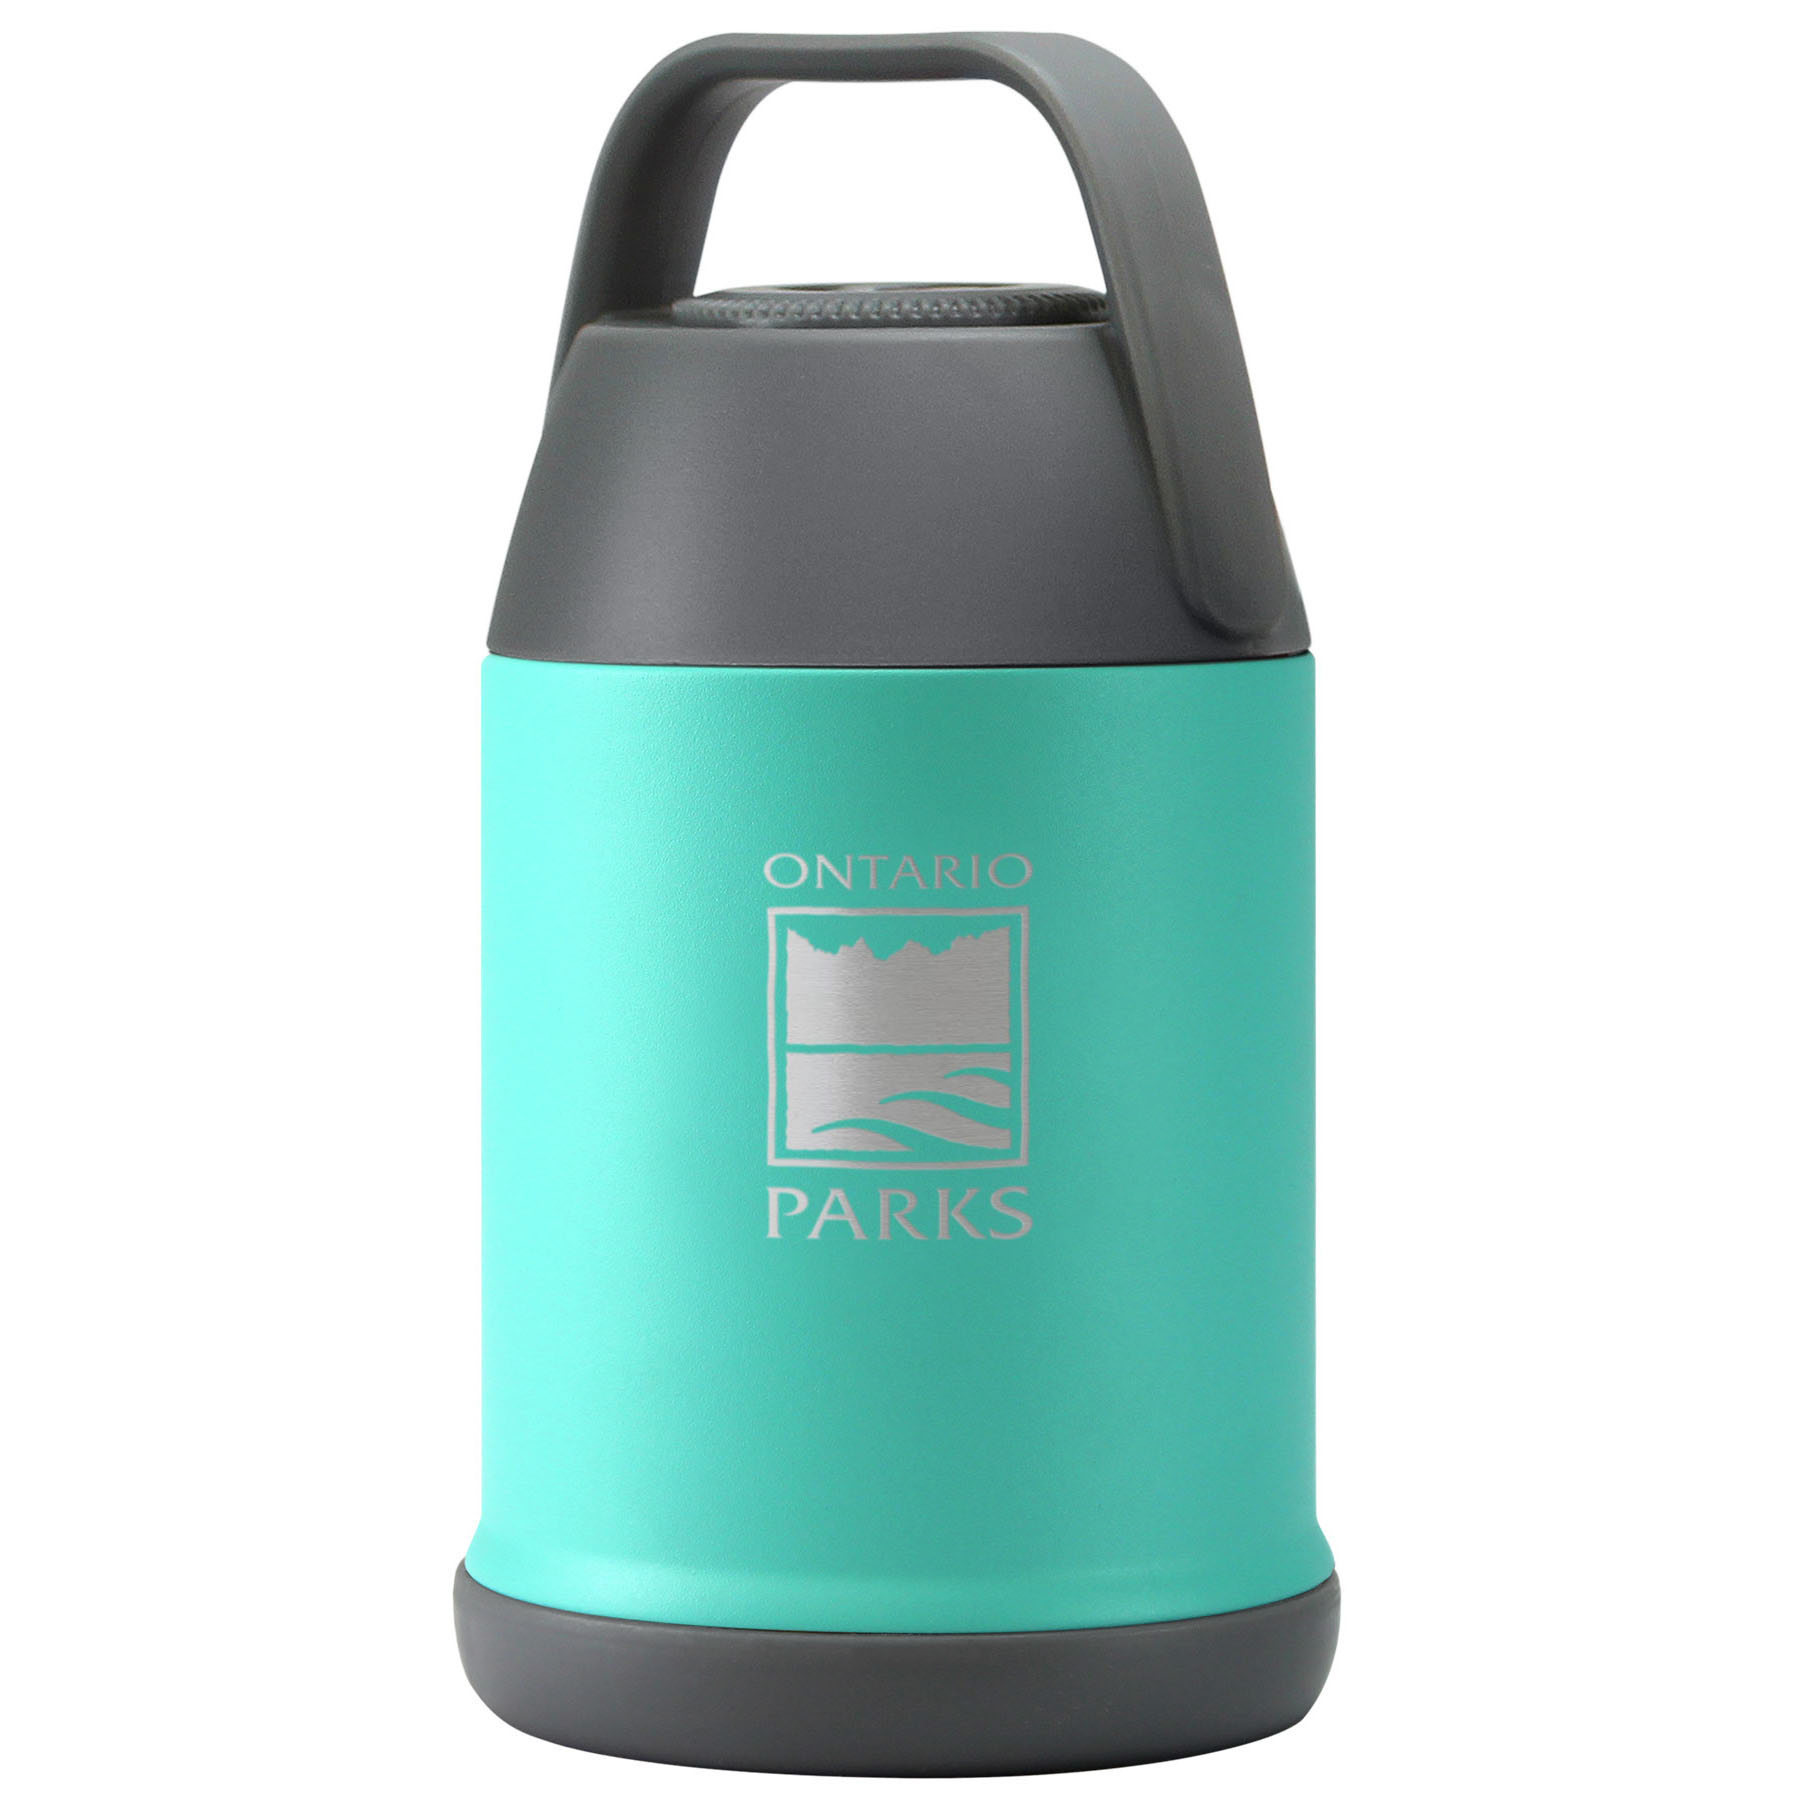 A teal coloured food thermos with a black lid and base.